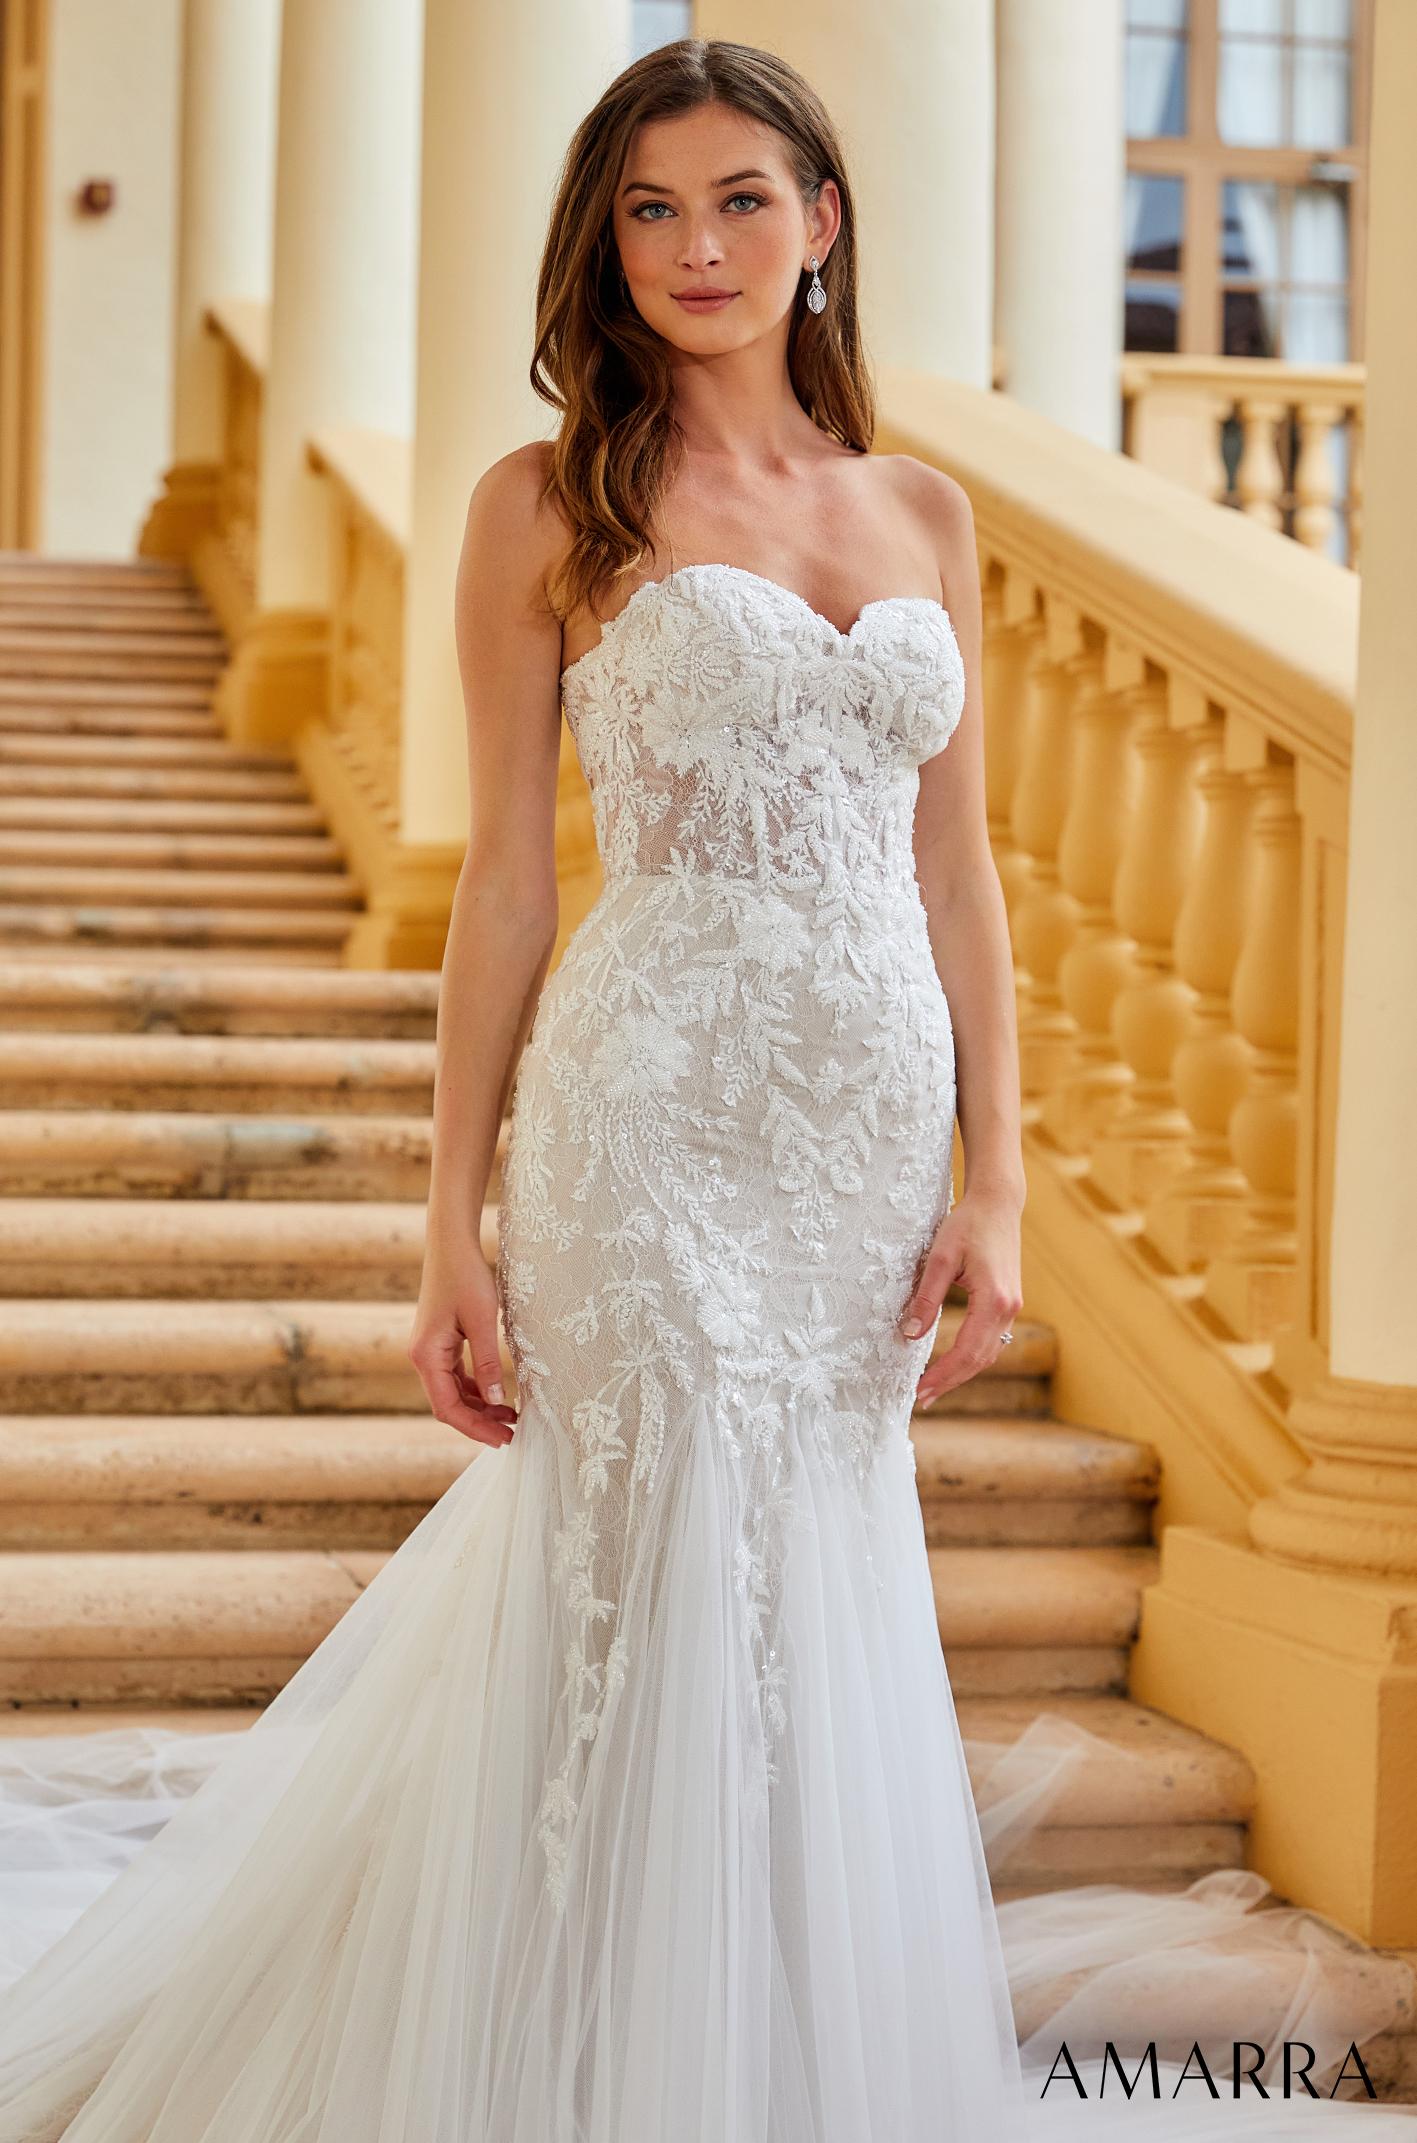 Spaghetti Strap Wedding Gown with Lace Overlay – HAREM's Brides